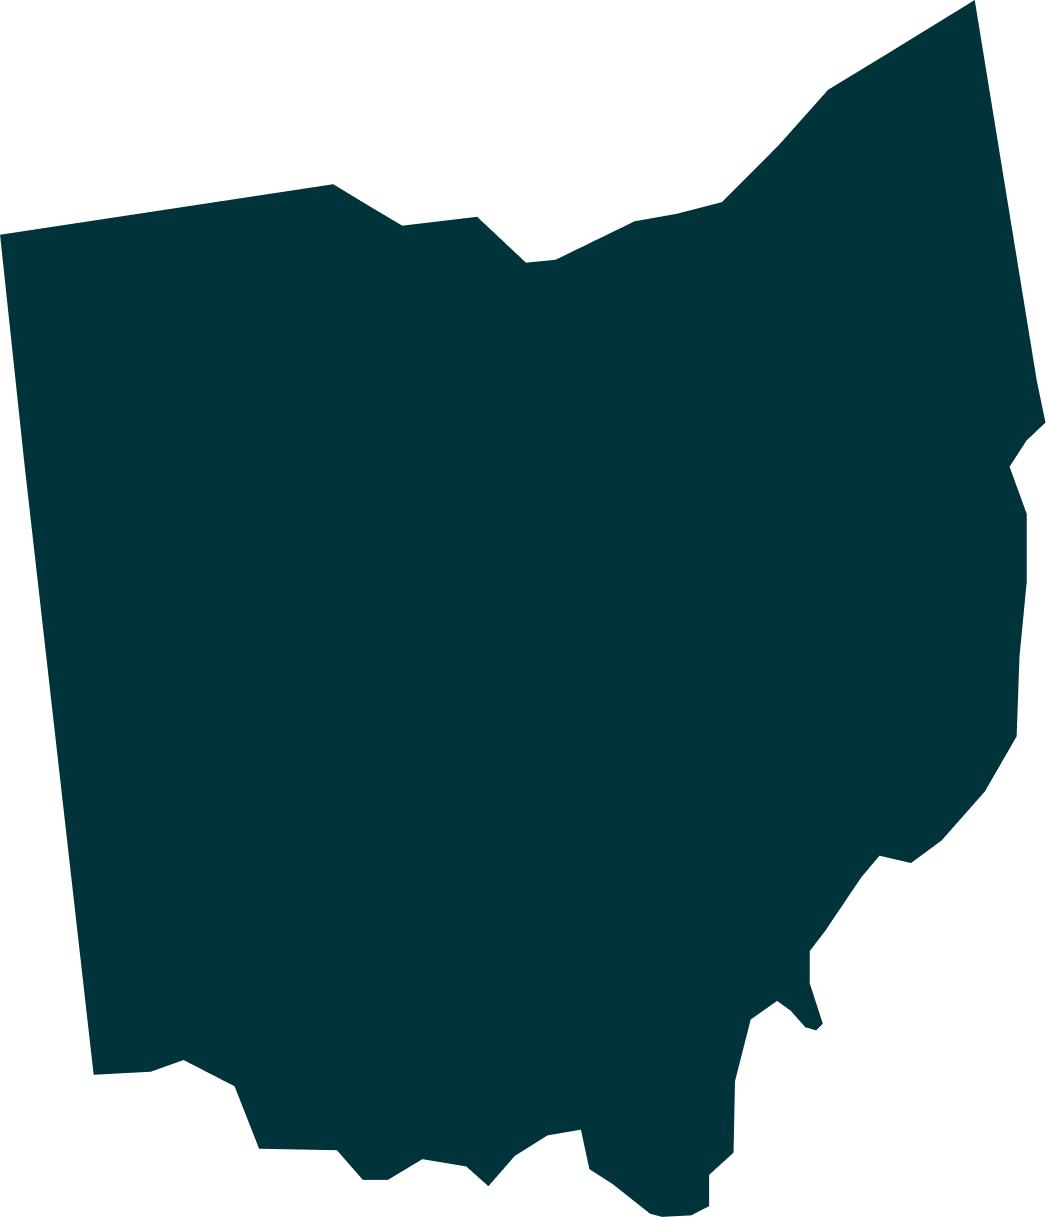 A silhouette of the state of Ohio.